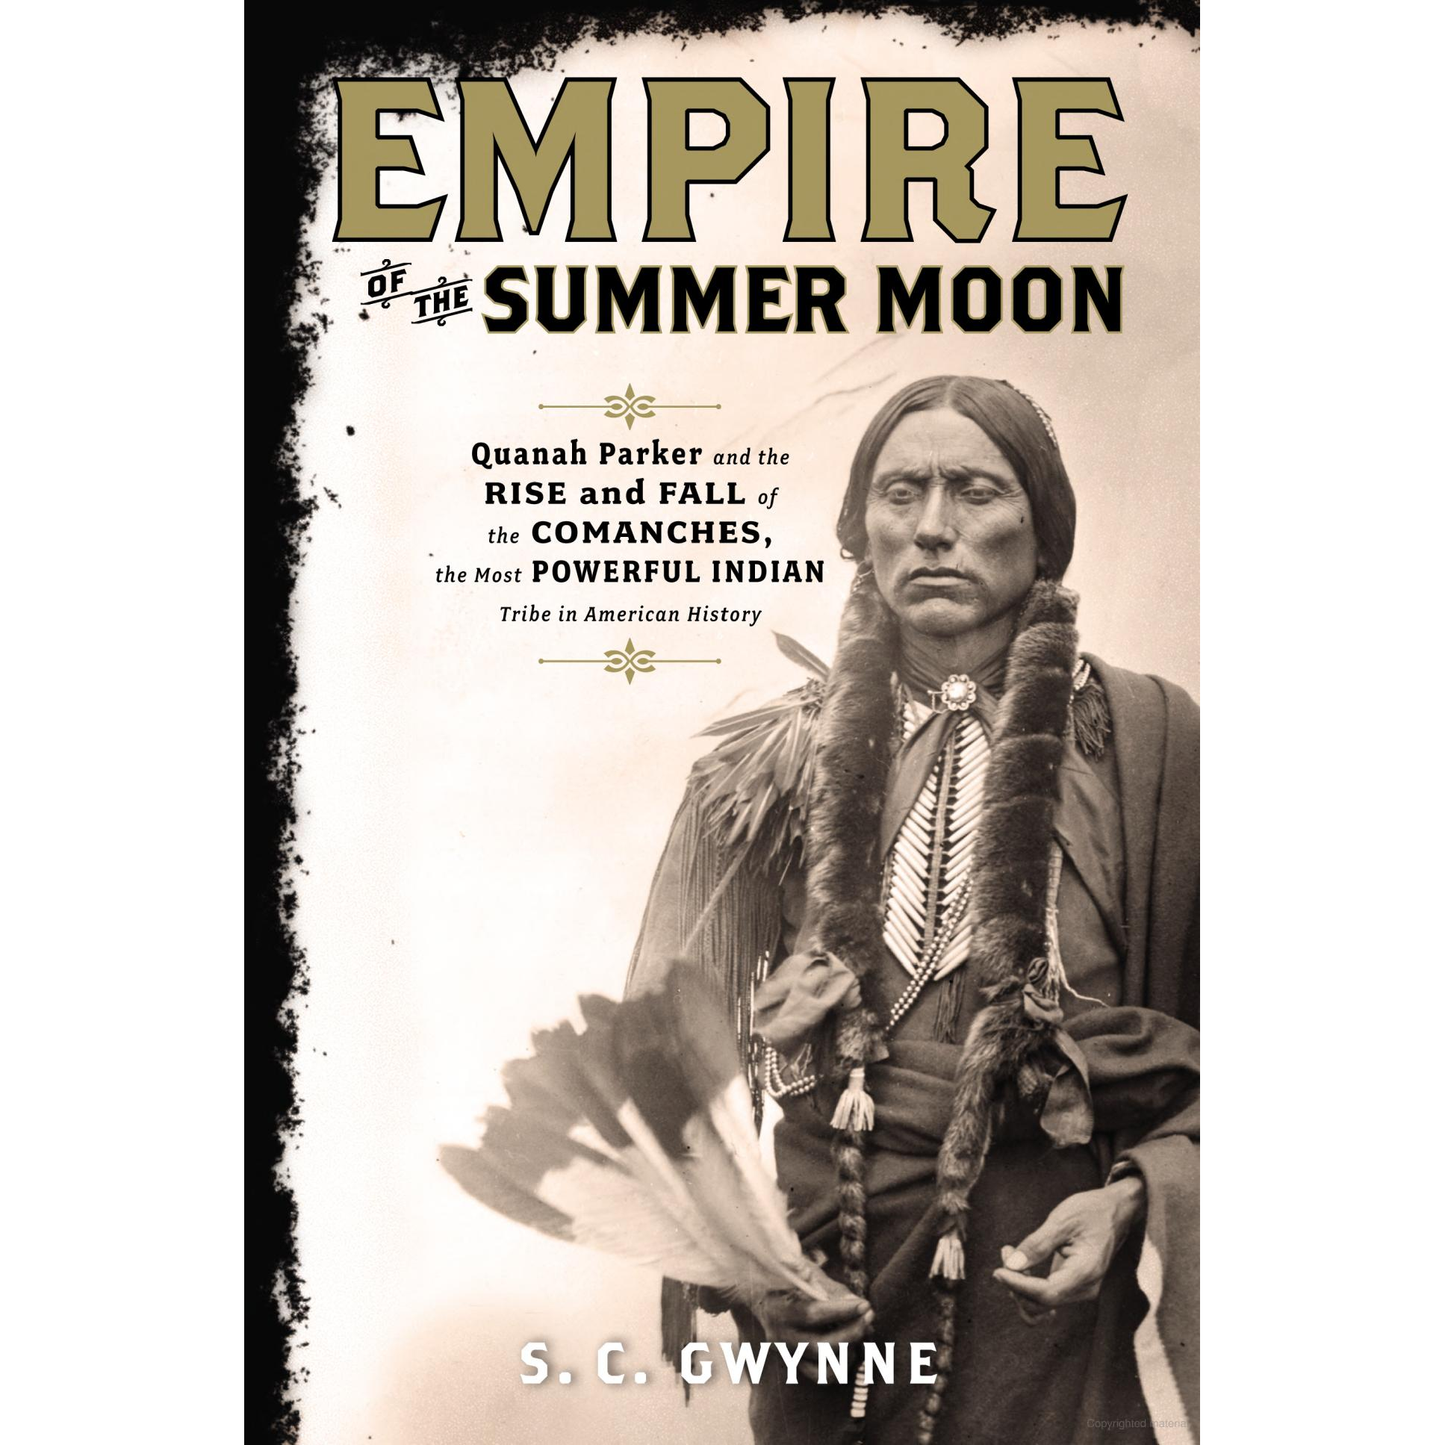 Empire of the Summer Moon: Quanah Parker and the Rise and Fall of the Comanches, the Most Powerful Tribe in American History by S.C. Gwynne